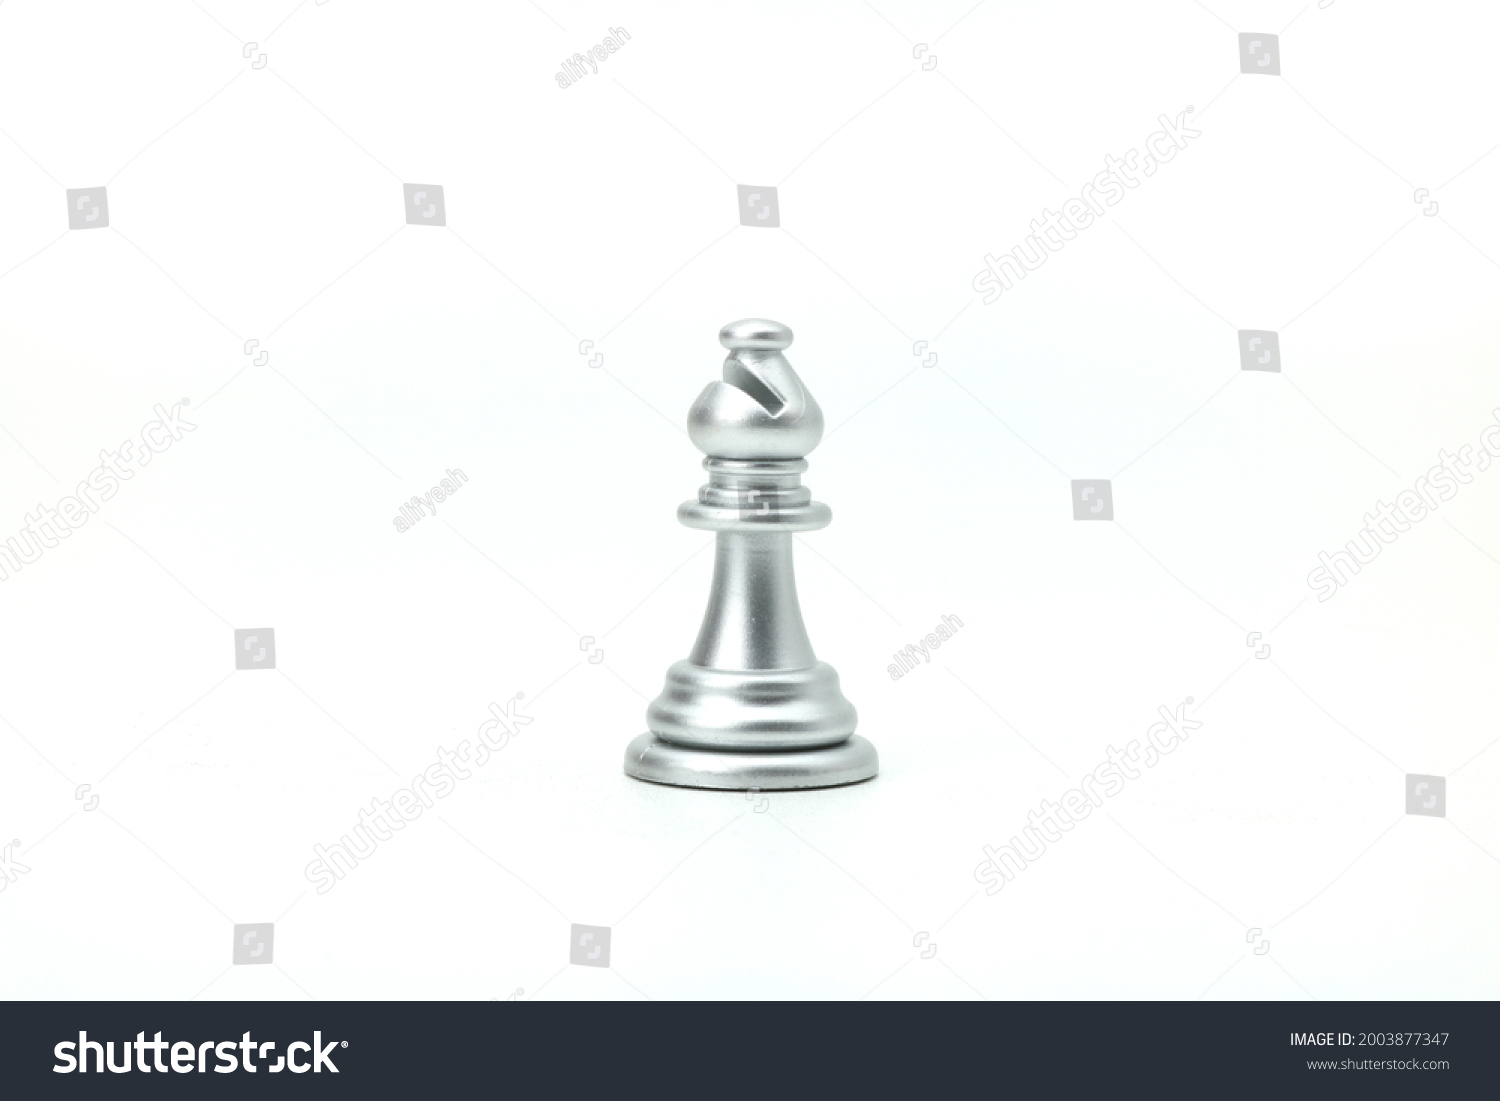 Silver bishop chess piece on white background. Isolated. #2003877347